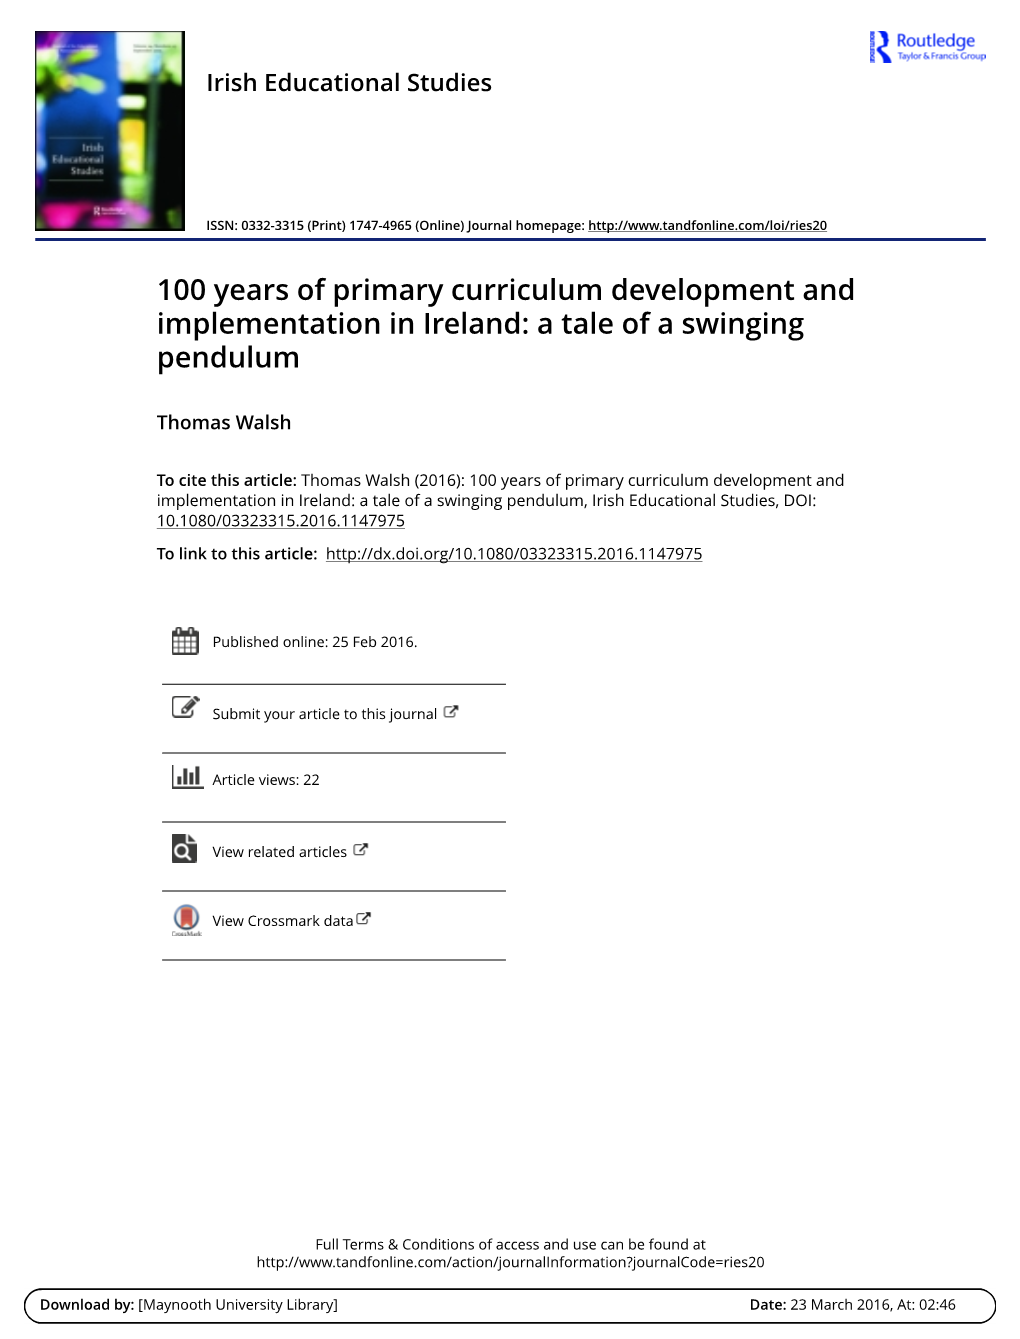 100 Years of Primary Curriculum Development and Implementation in Ireland: a Tale of a Swinging Pendulum